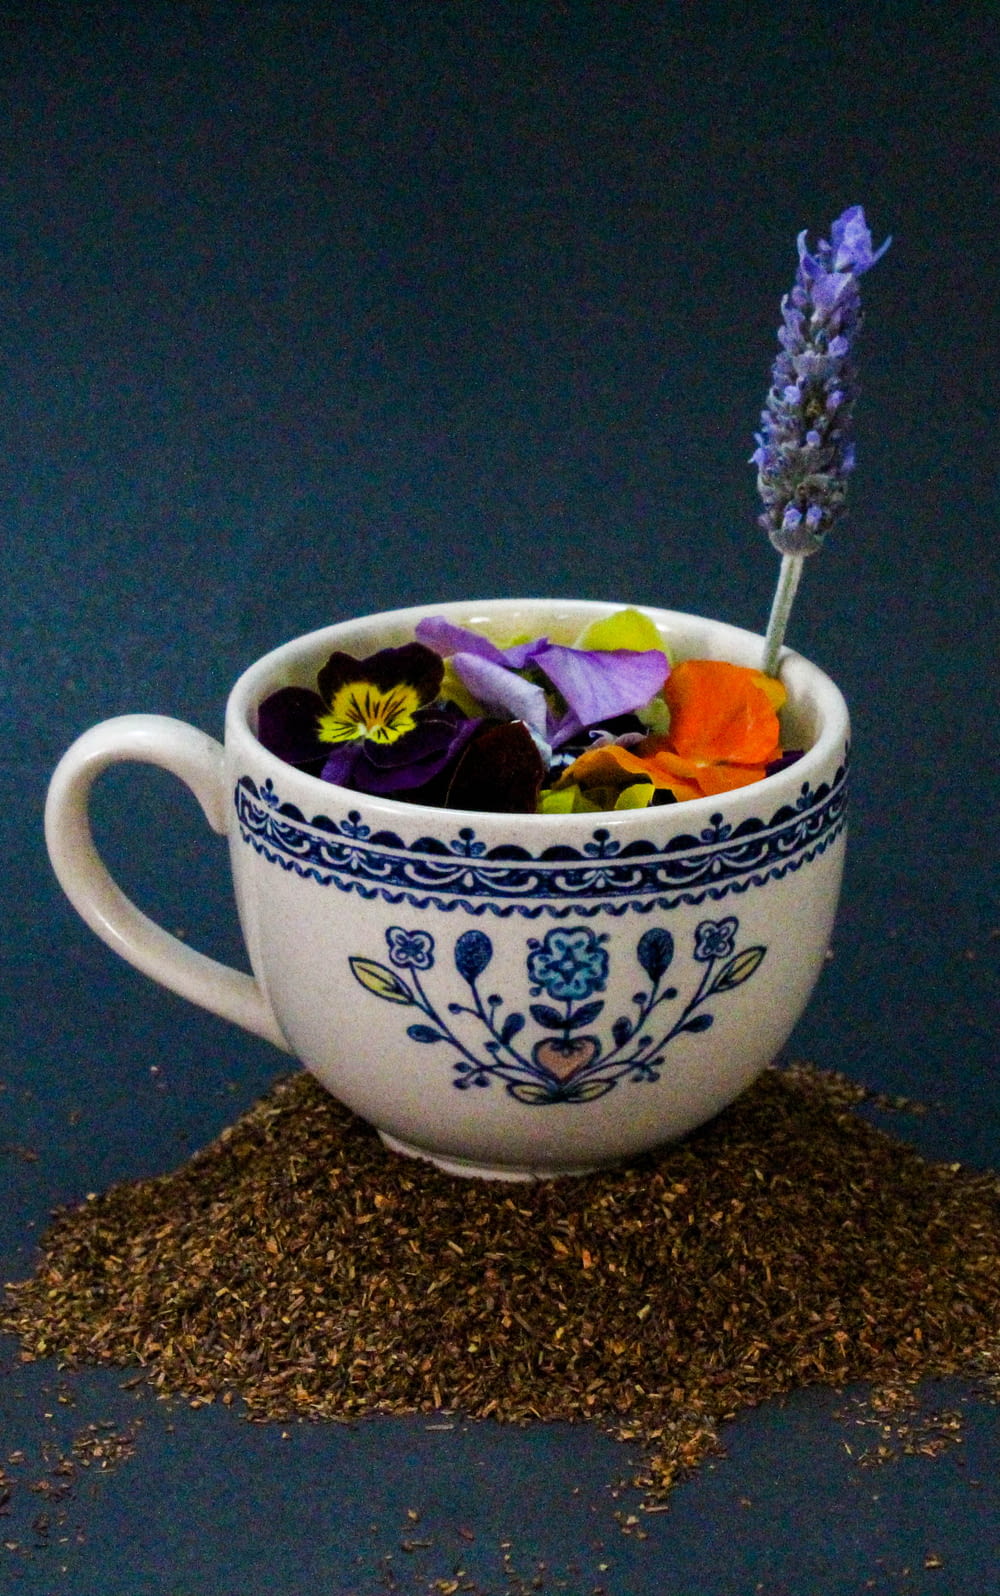 a cup with a flower design